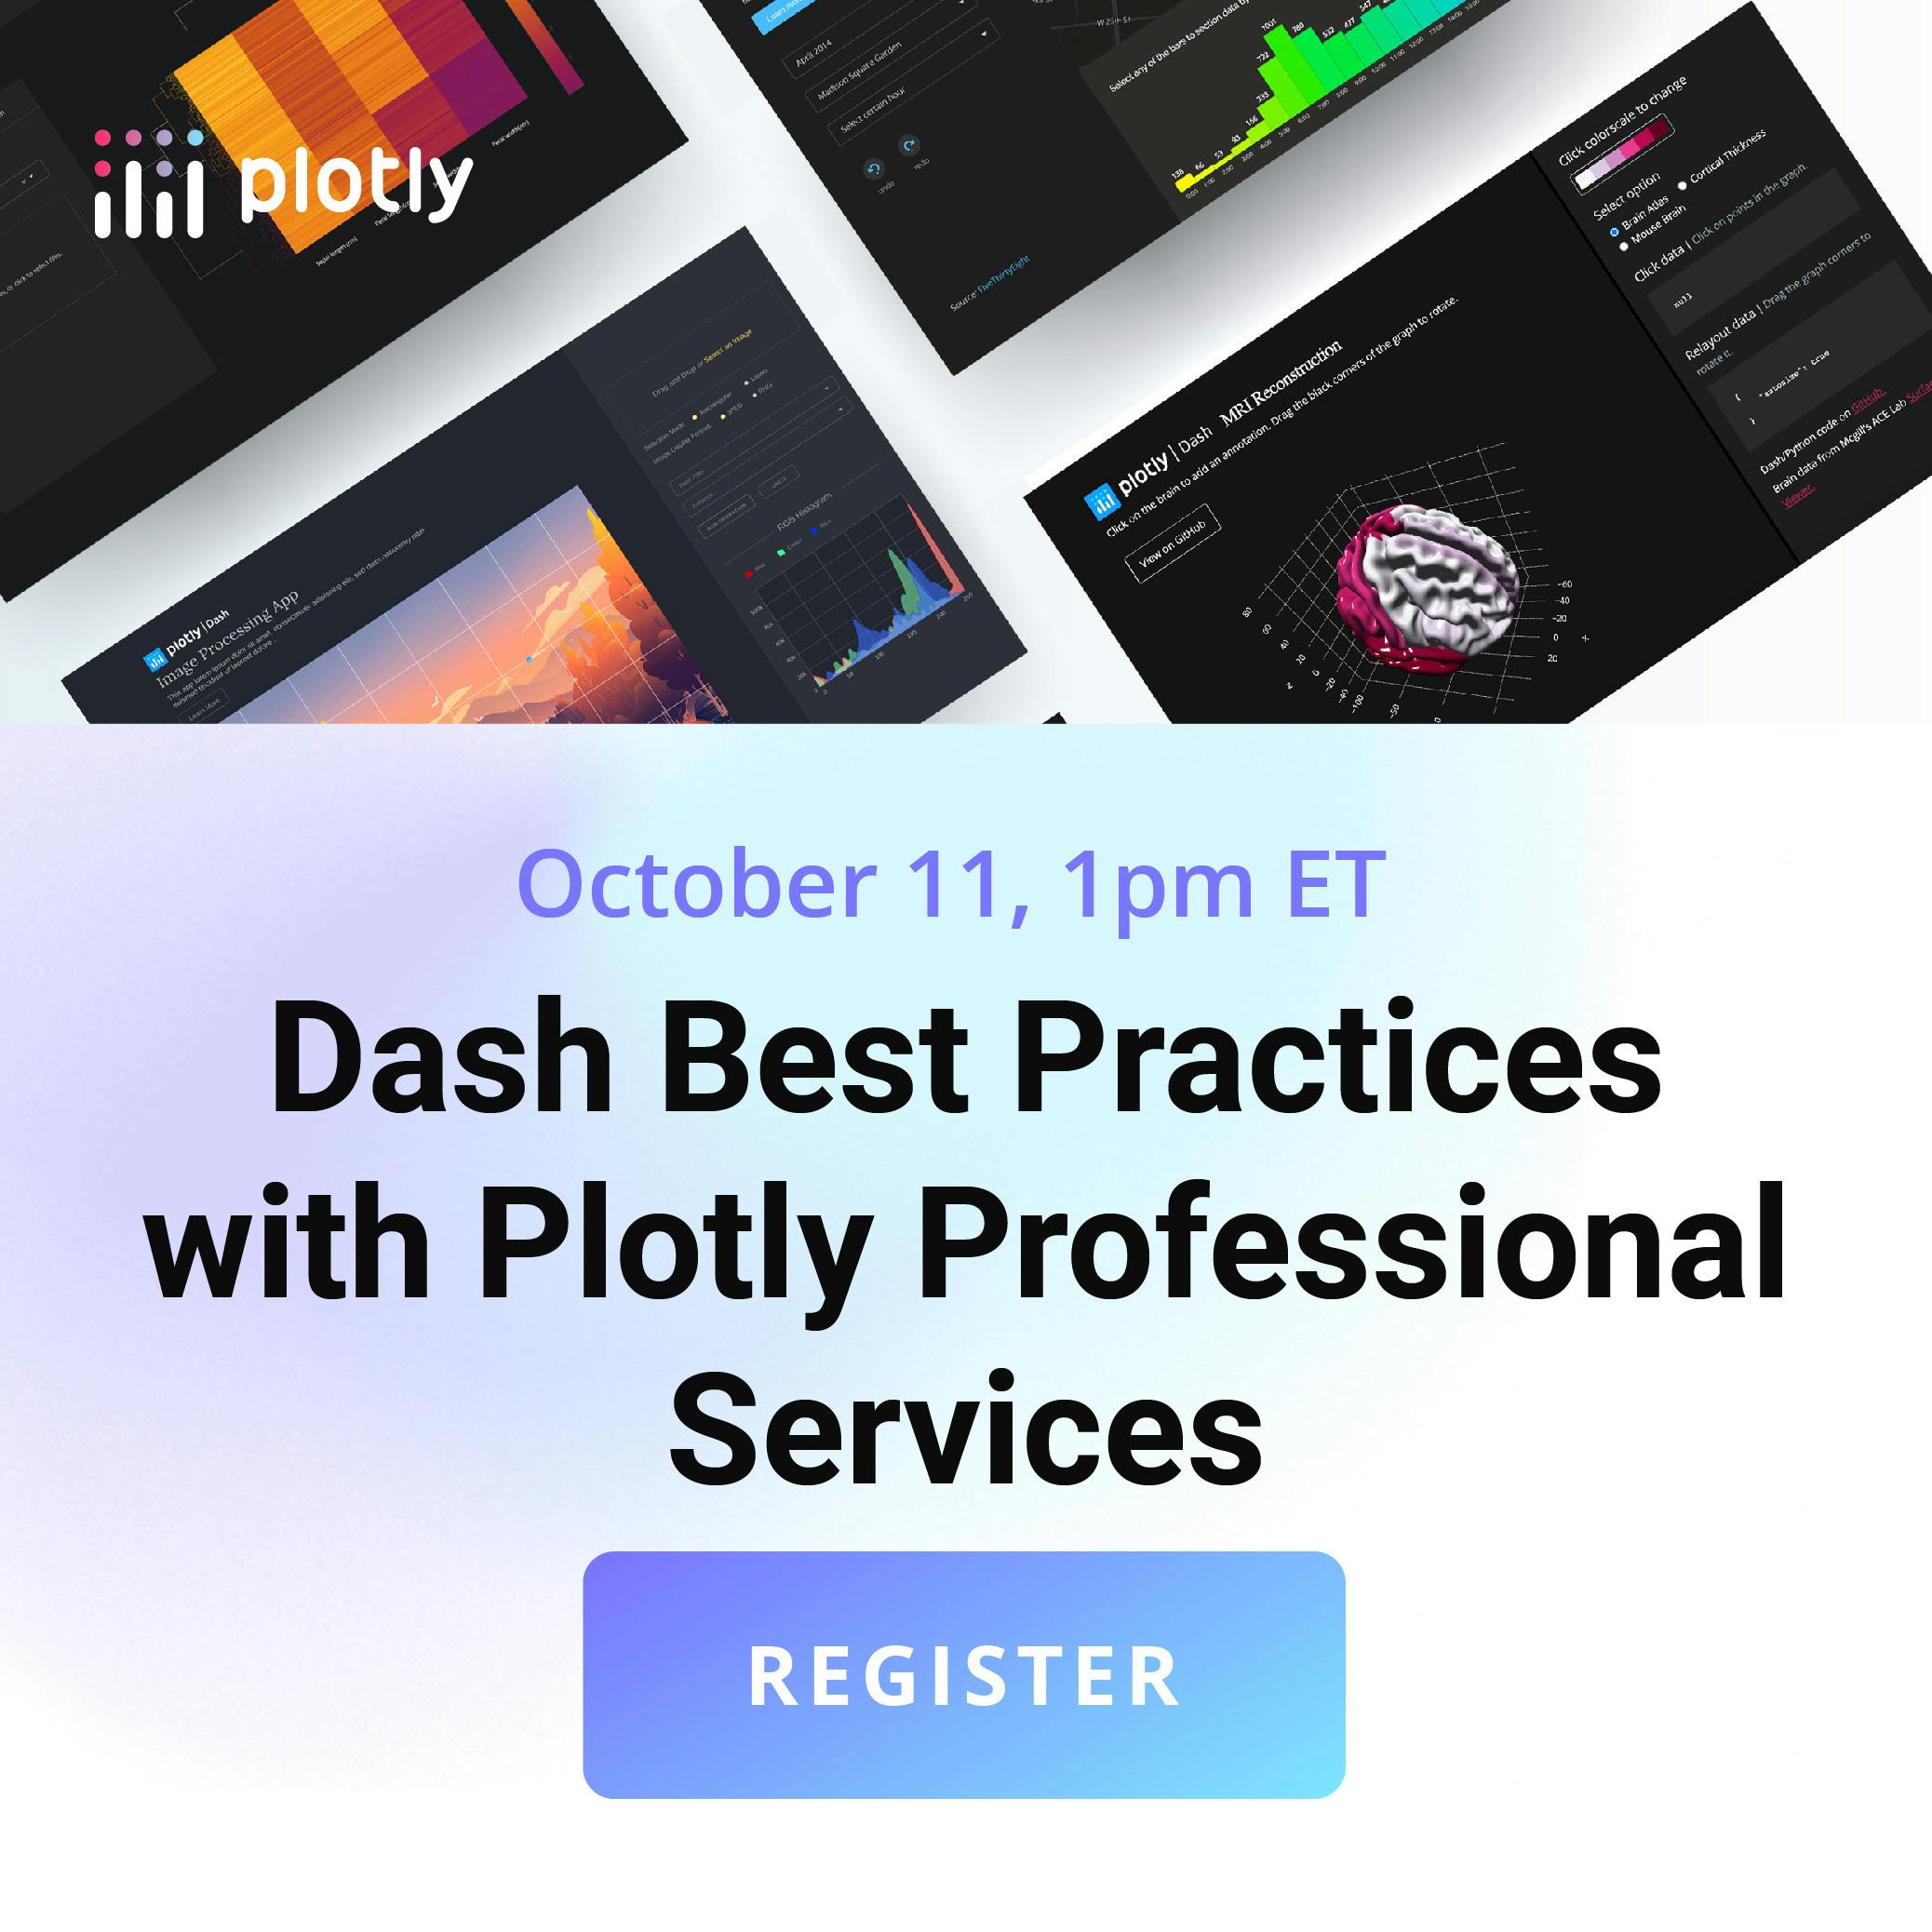 Register for the upcoming webinar: Dash Best Practices with Plotly Professional Services